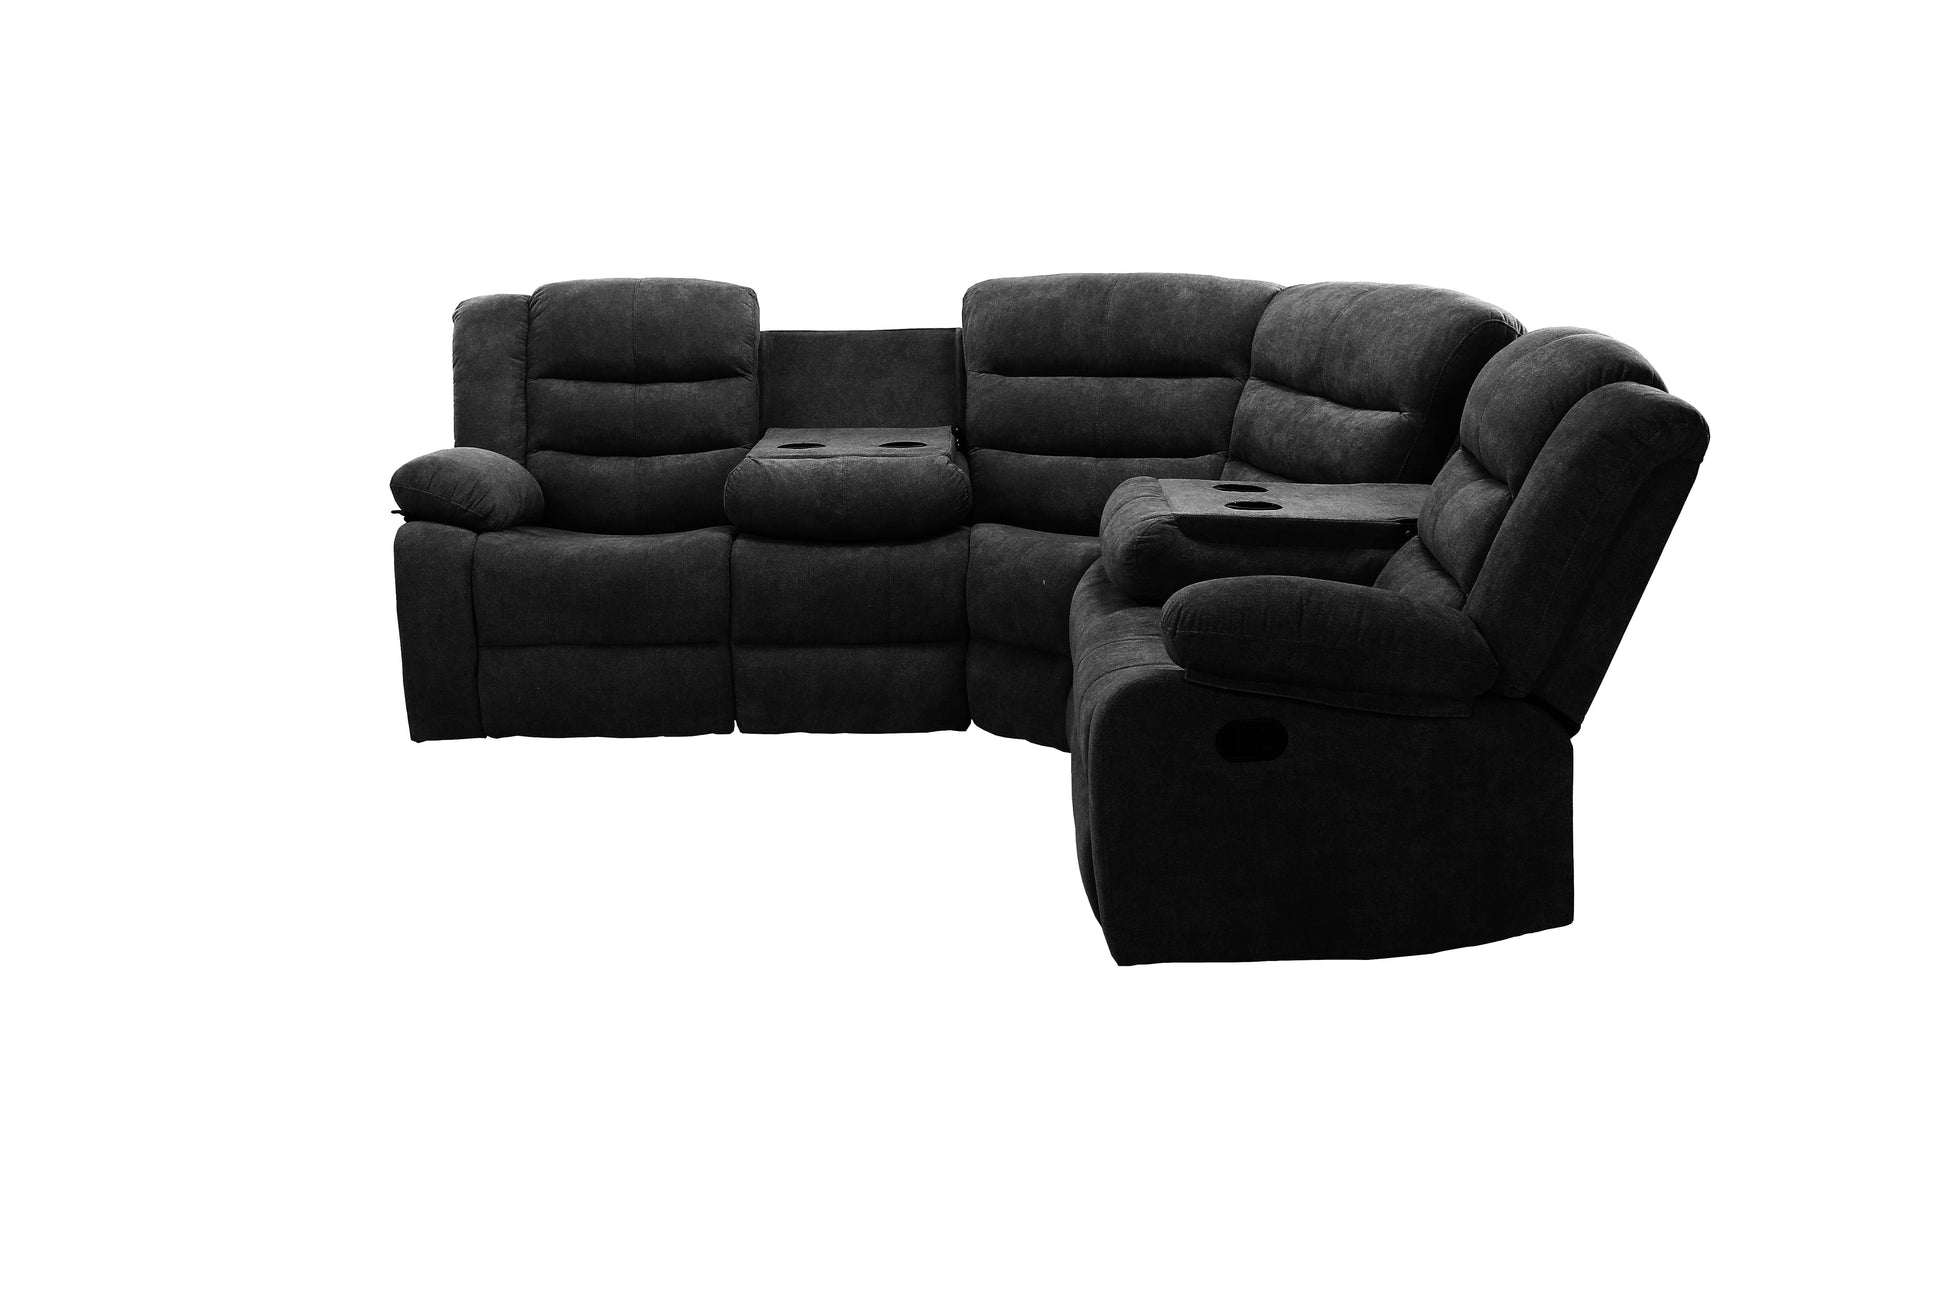 TFC&H Co. Sectional Manual Recliner Living Room Set - Black- Ships from The US - sectional at TFC&H Co.